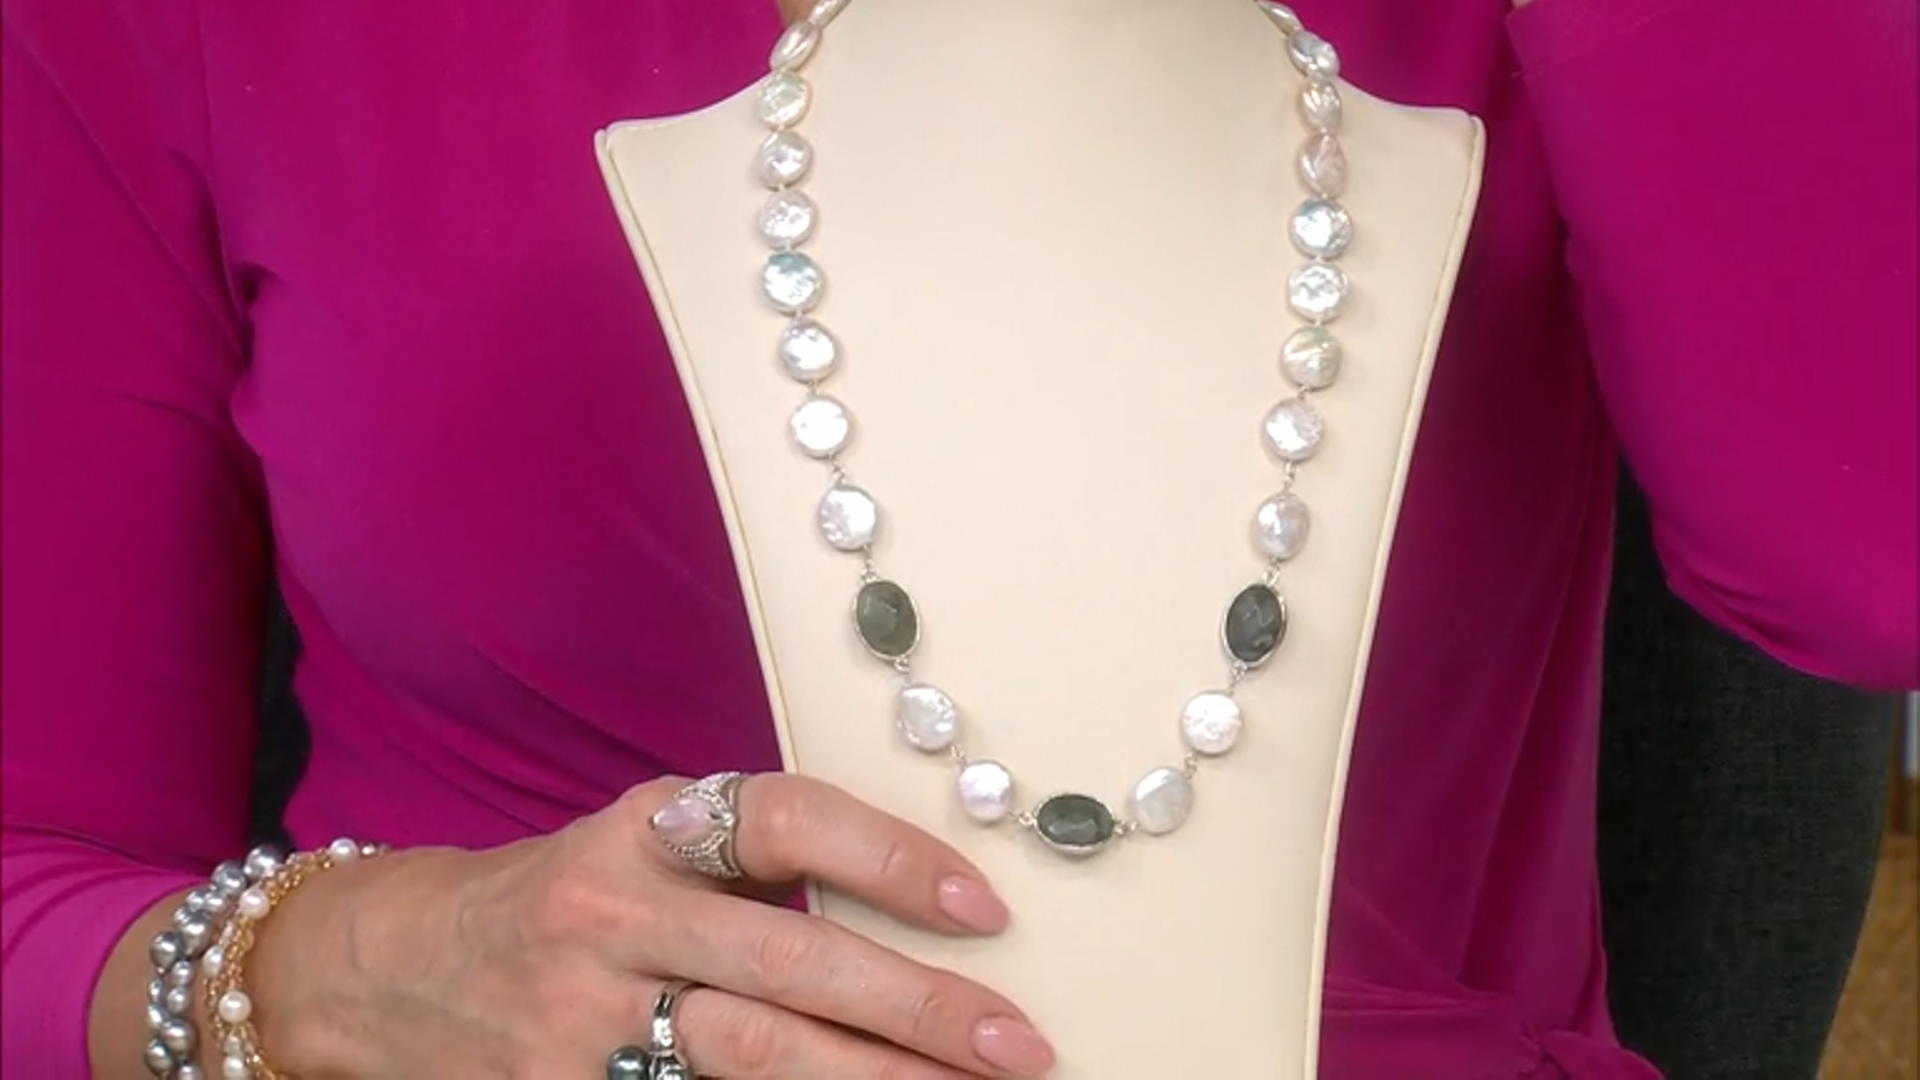 White Cultured Freshwater Pearl With Labradorite Rhodium Over Silver Necklace Video Thumbnail